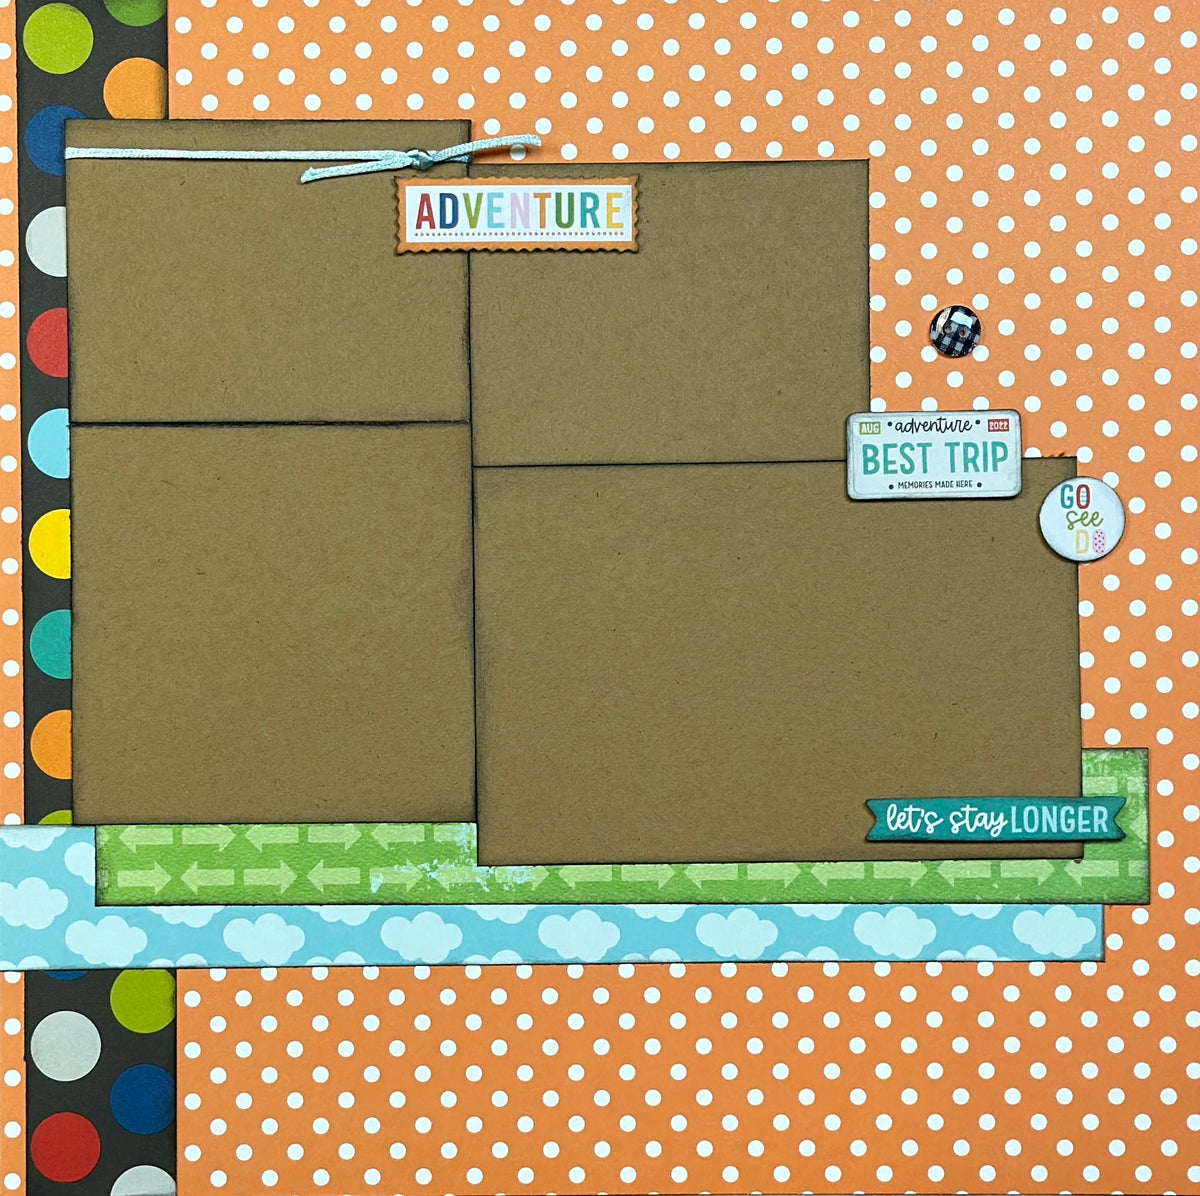 Explore - Our Adventure, Outdoor Themed 2 Page DIY Scrapbooking Layout –  Crop-A-Latte